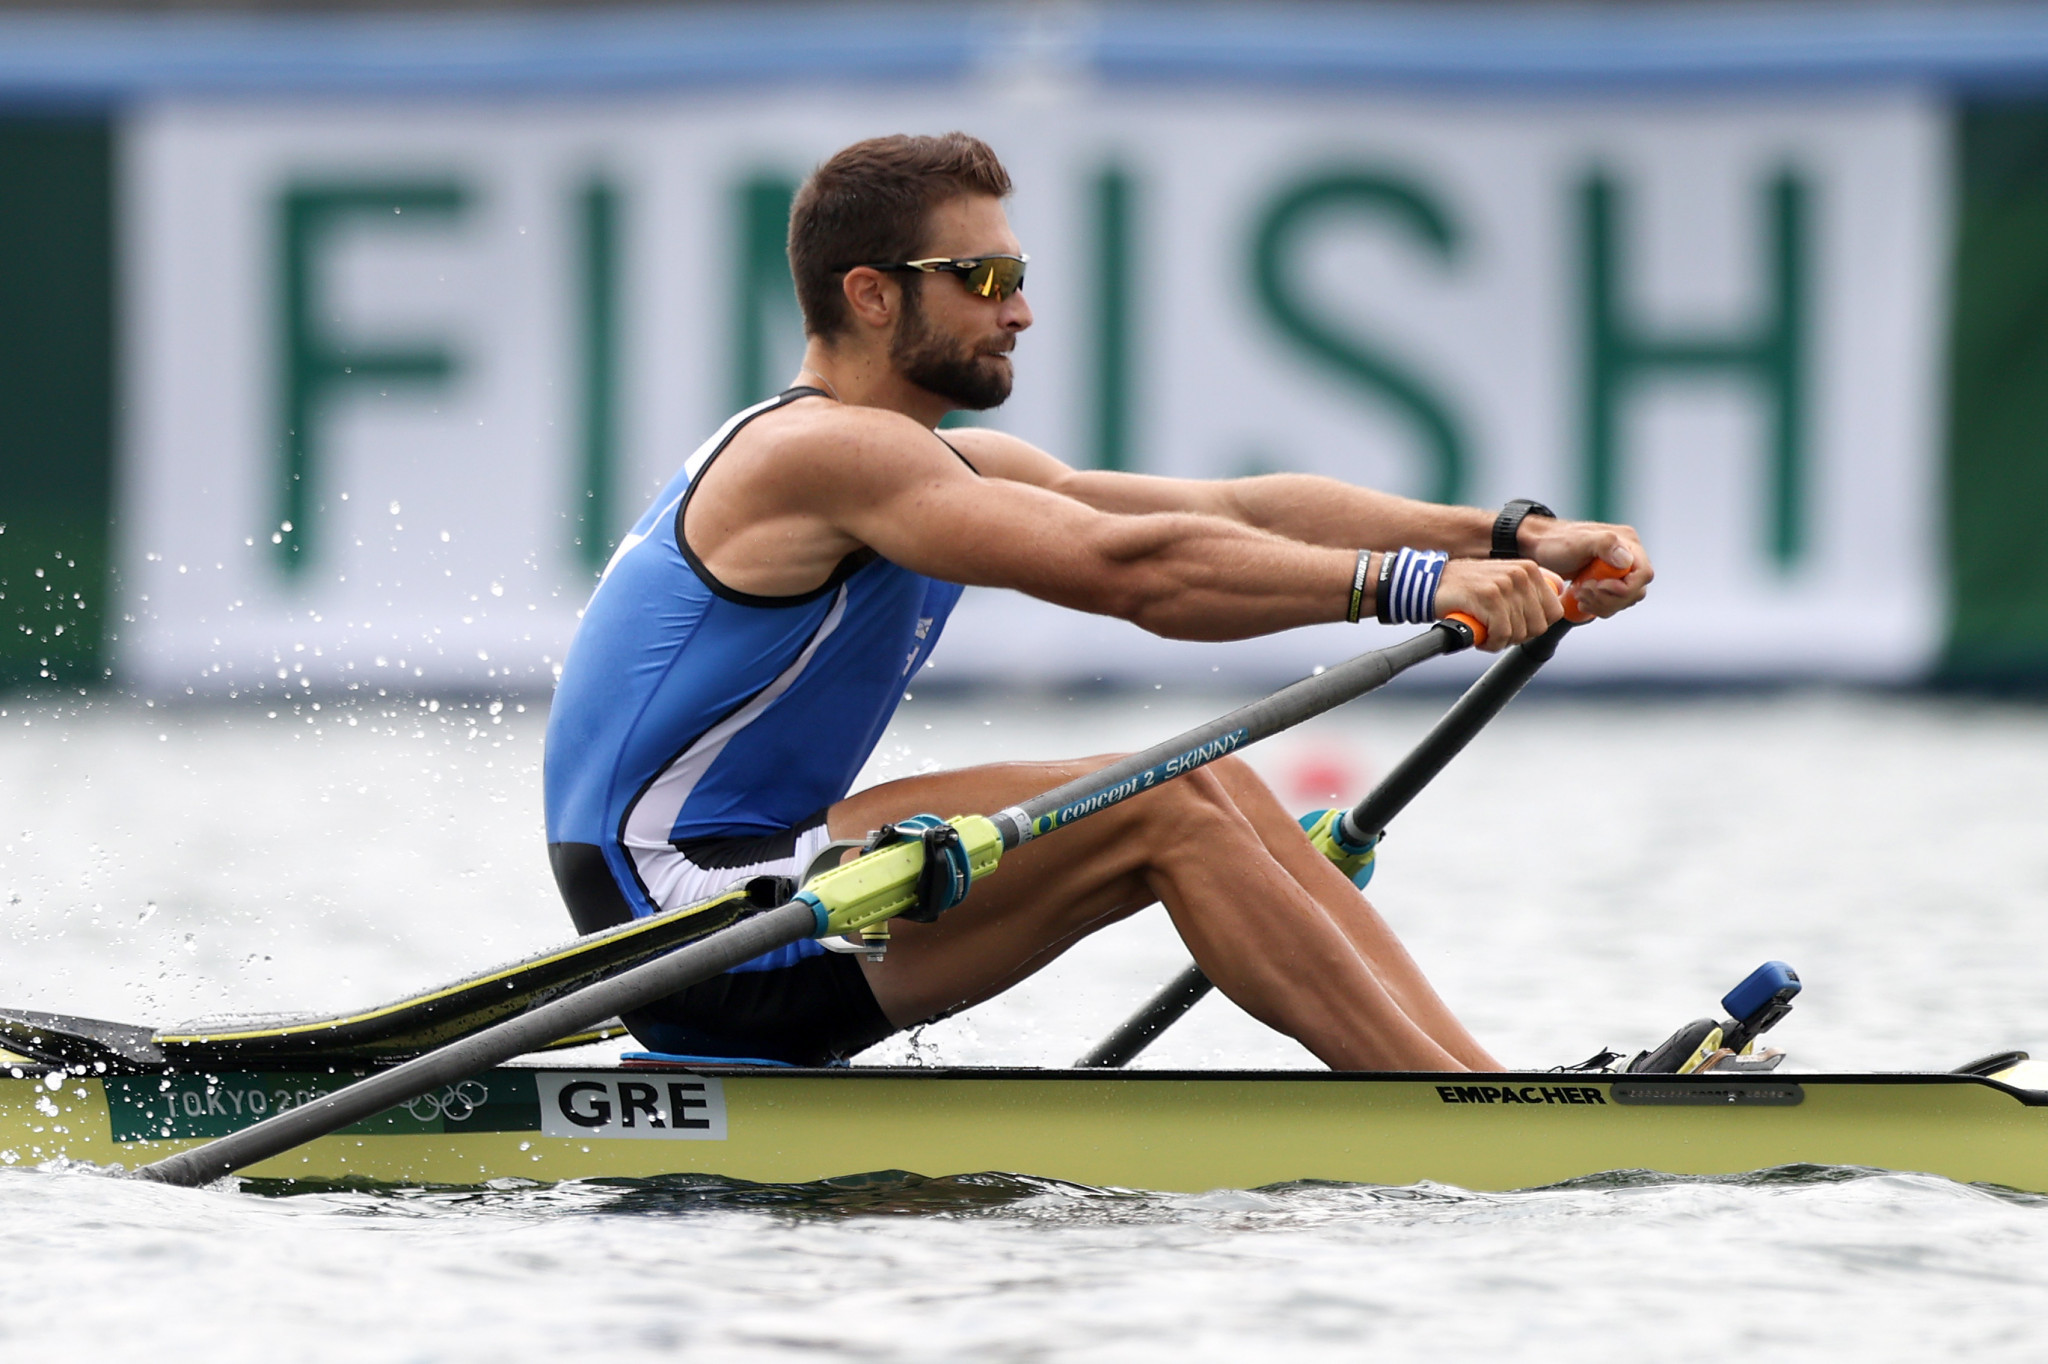 Olympic champion Ntouskos among stars at first leg of World Rowing Cup in Belgrade